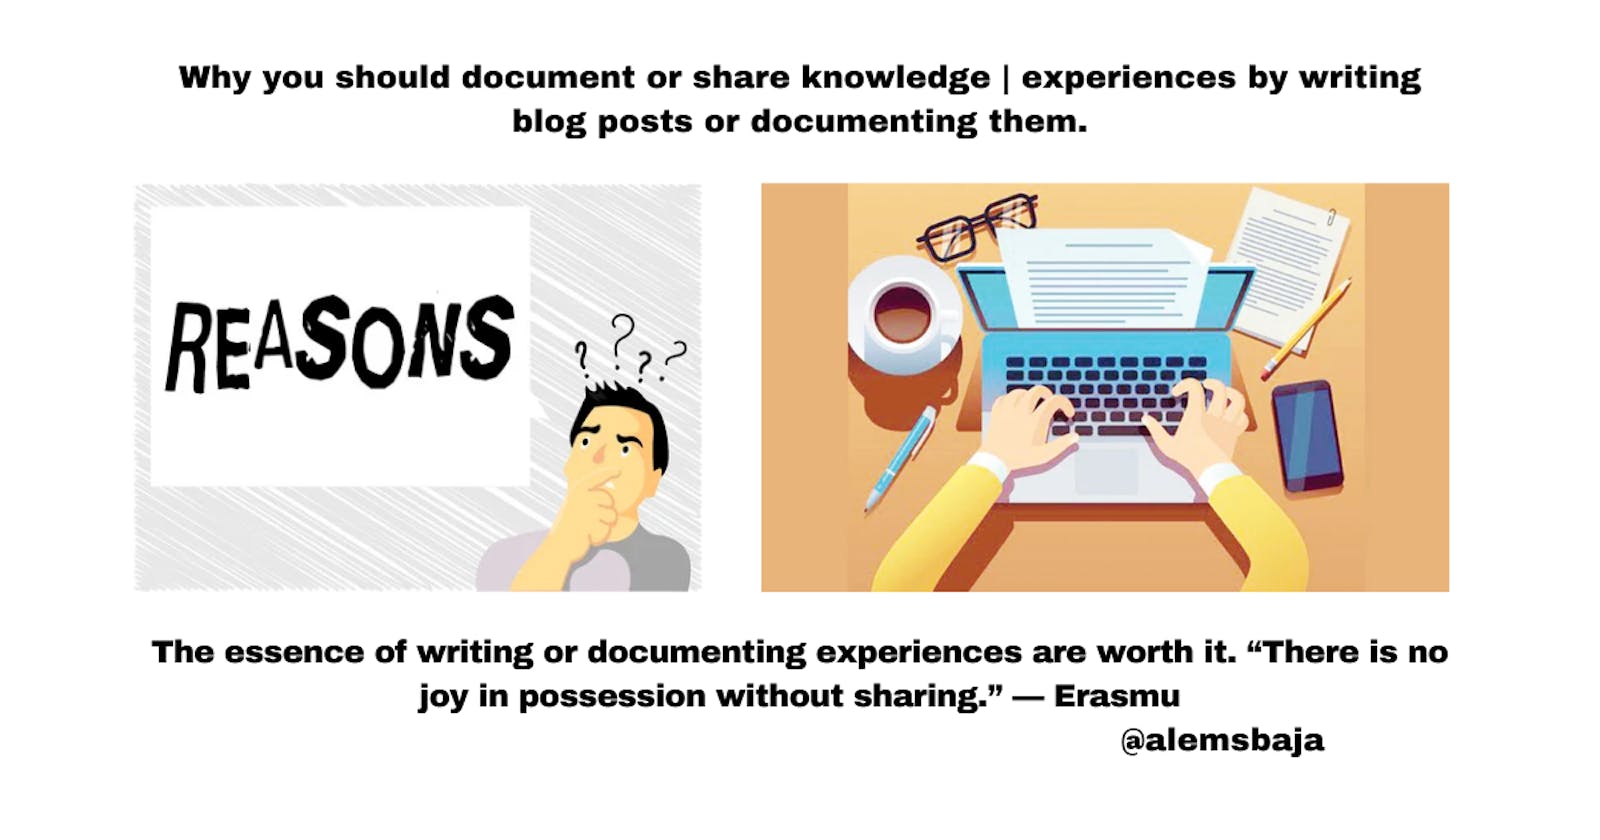 Why you should document or share knowledge | experiences by writing blog posts or documenting them.